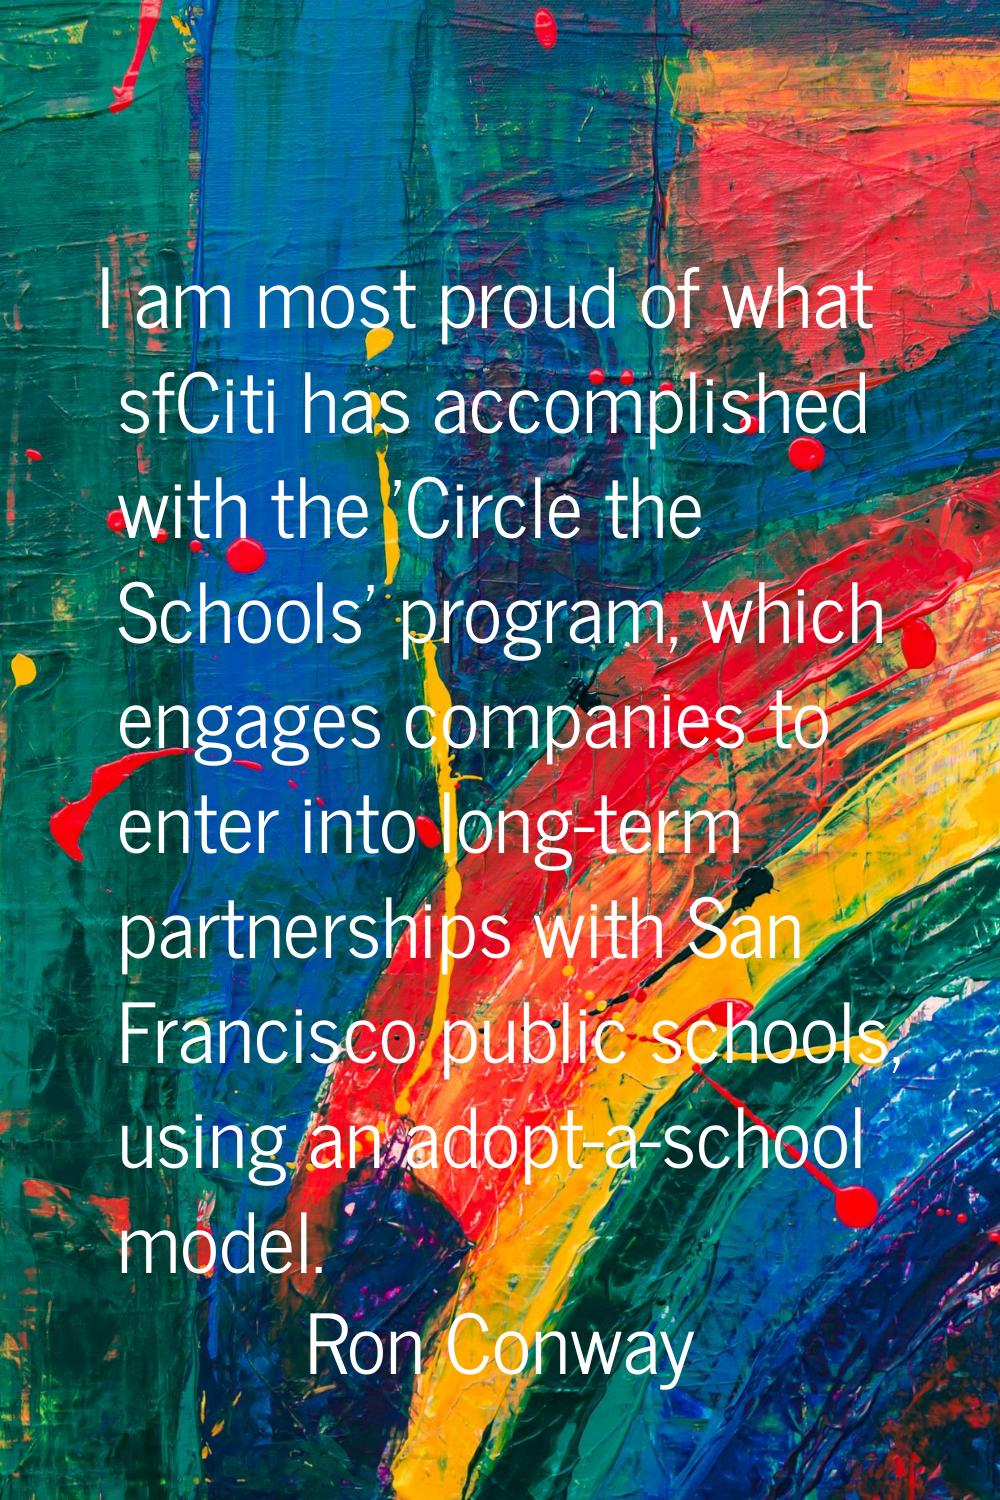 I am most proud of what sfCiti has accomplished with the 'Circle the Schools' program, which engage